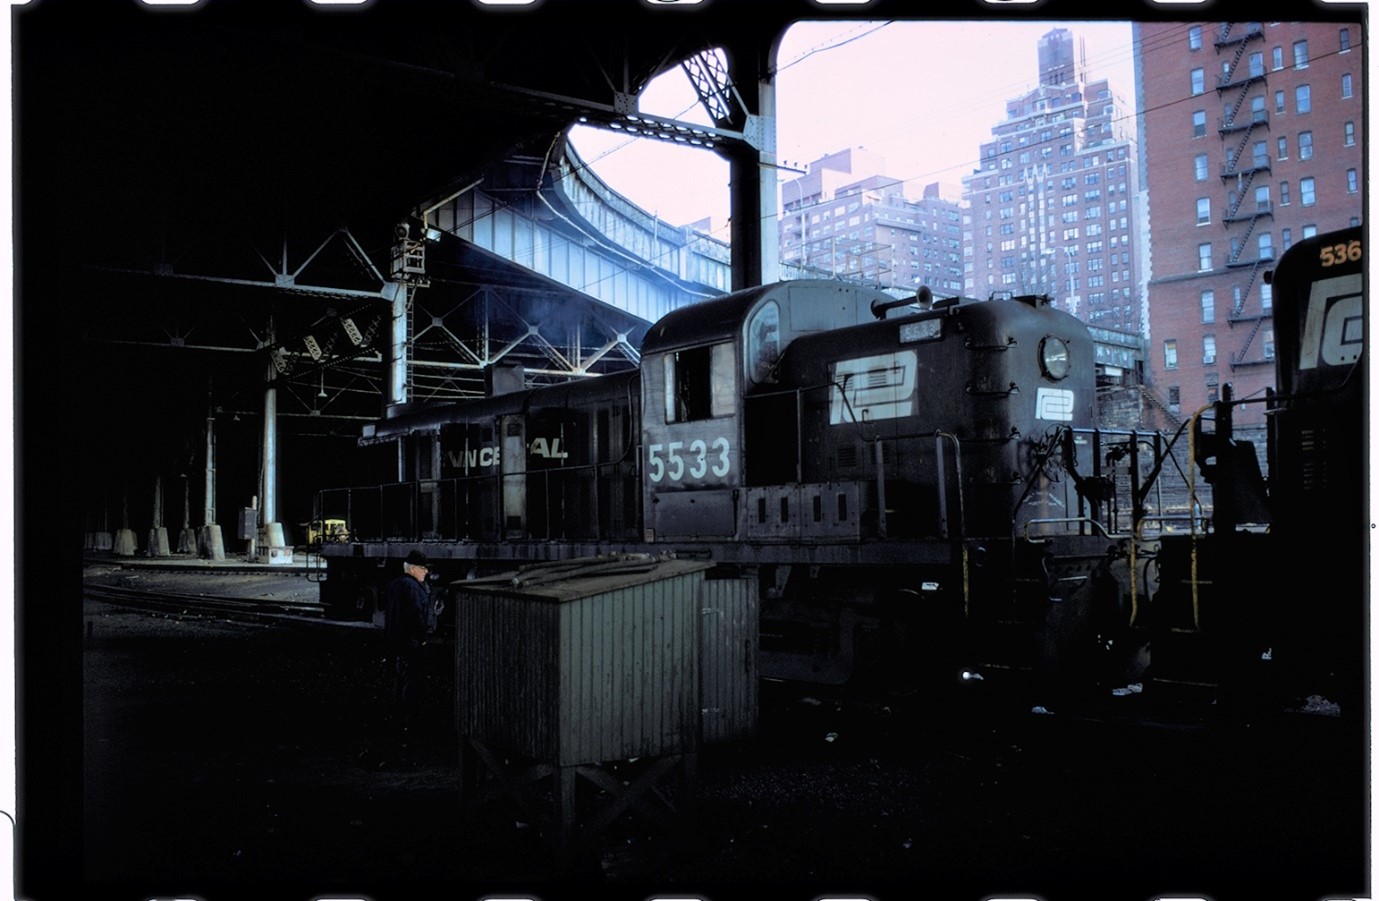 Colour photograph taken by Ian Logan in the 1970s of a Penn Central diesel locomotive in the West 60th Street yard in Manhattan.